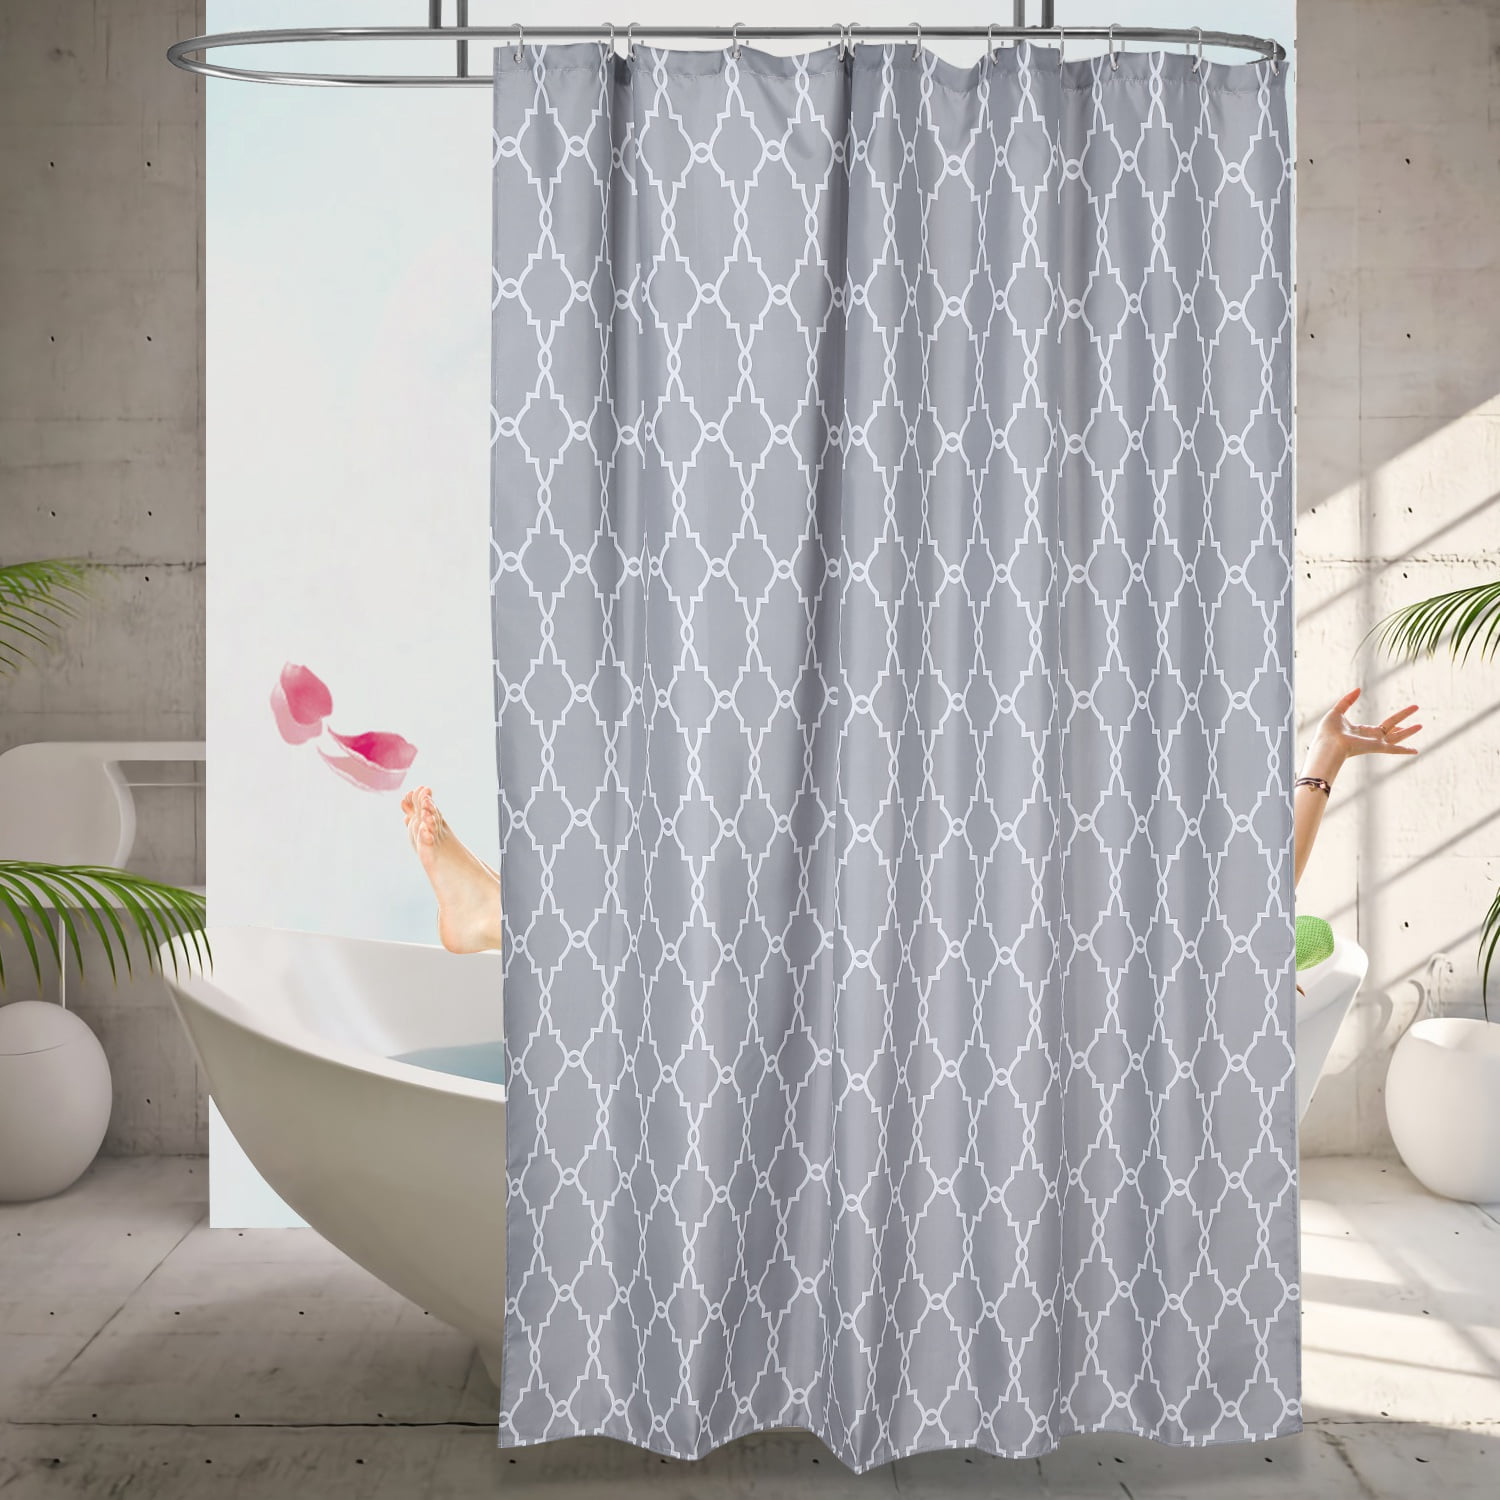 Details about   White Sun Waterproof Bathroom Polyester Shower Curtain Liner Water Resistant 